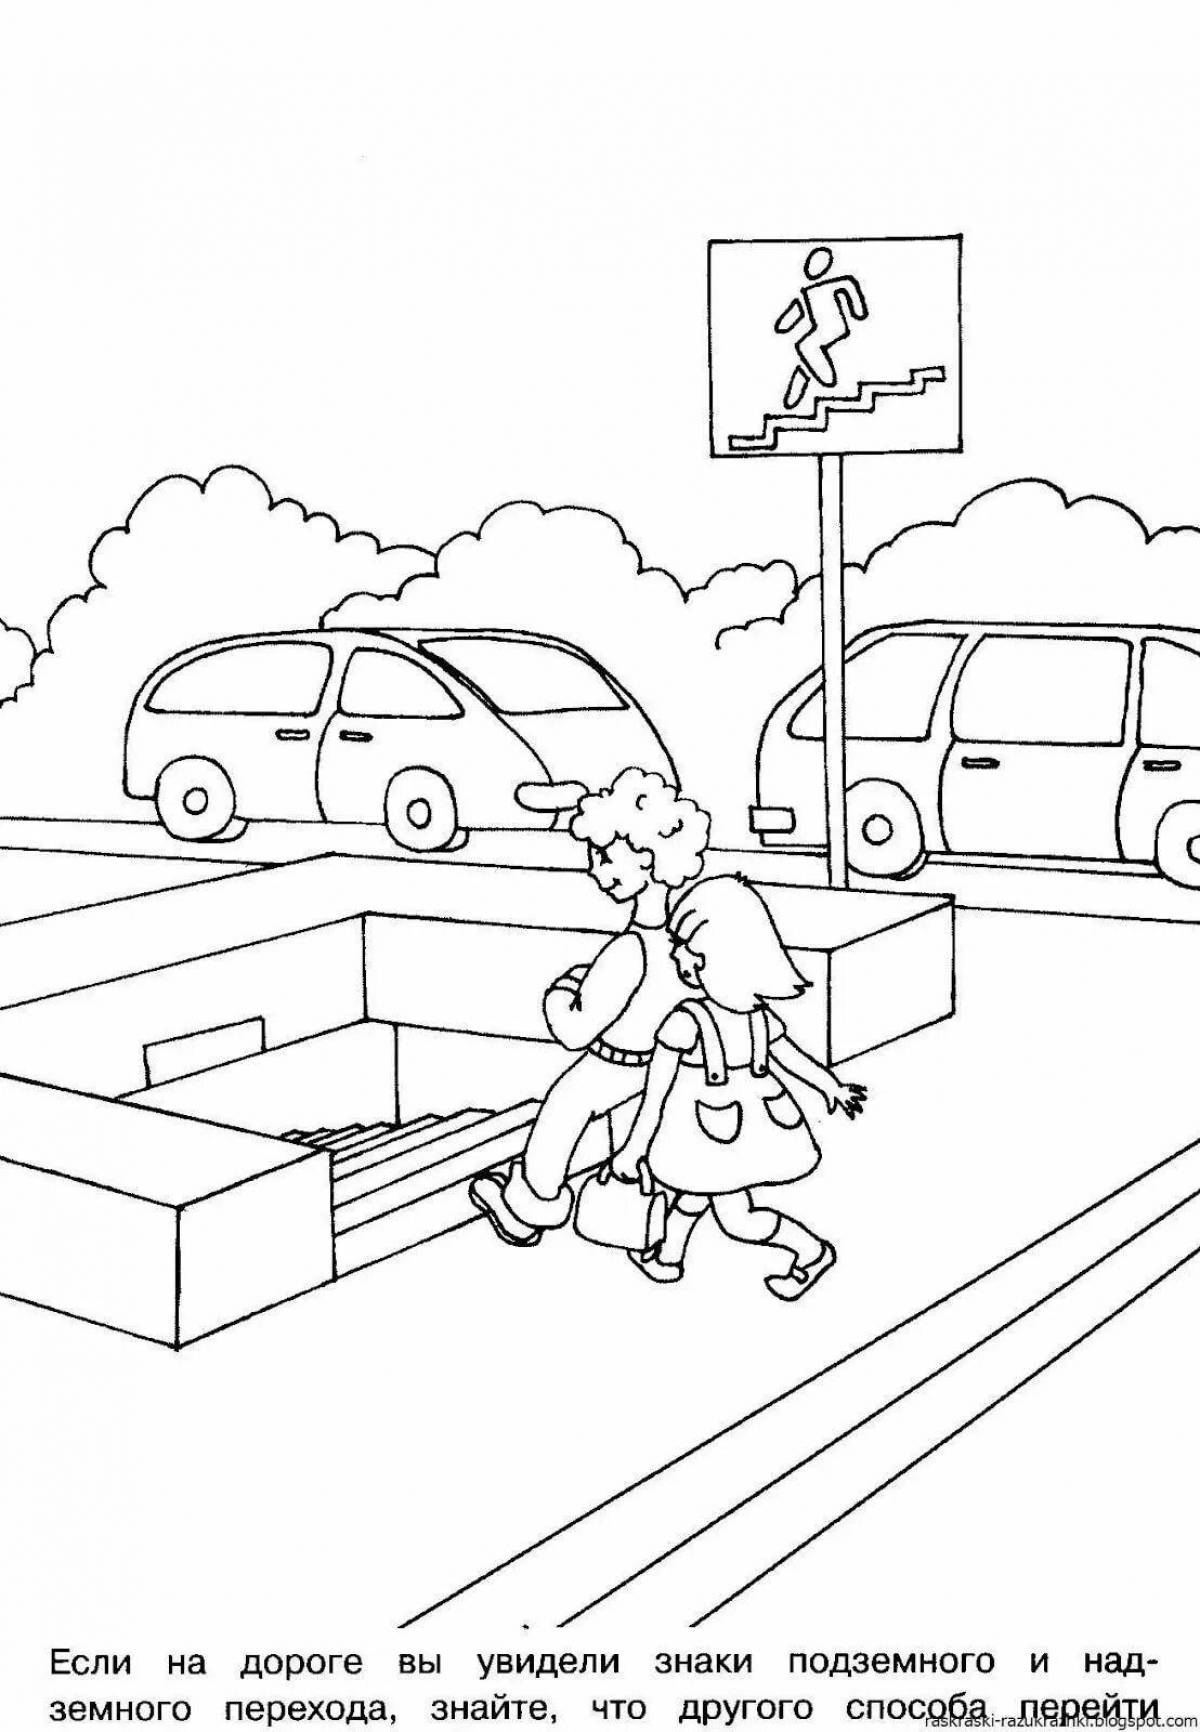 Pedestrian coloring book with color filling